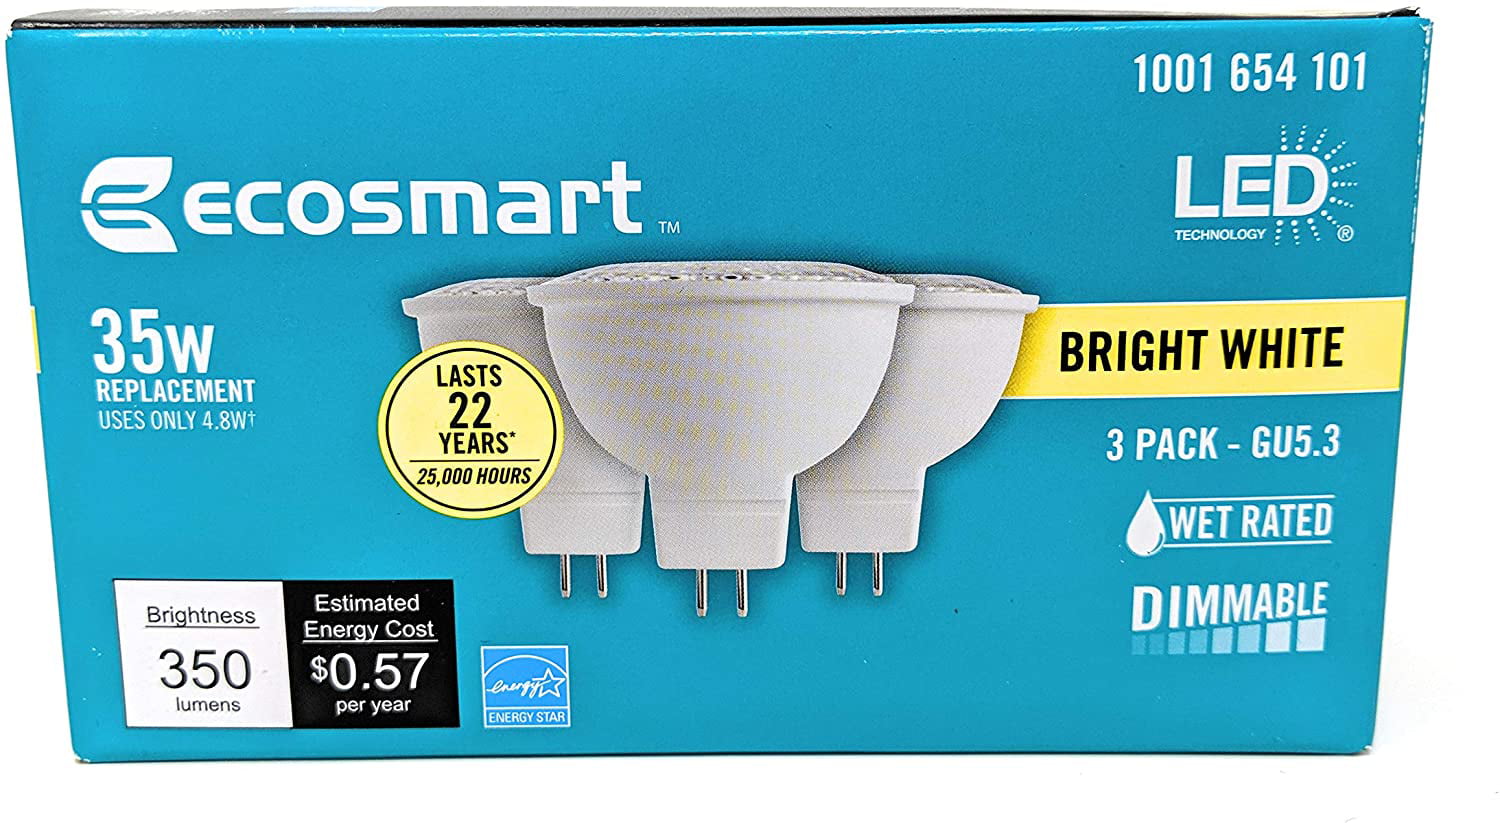 3-Pack LED 35w Replacement Bright White GU5.3 Dimmable LED Bulbs EcoSmart 